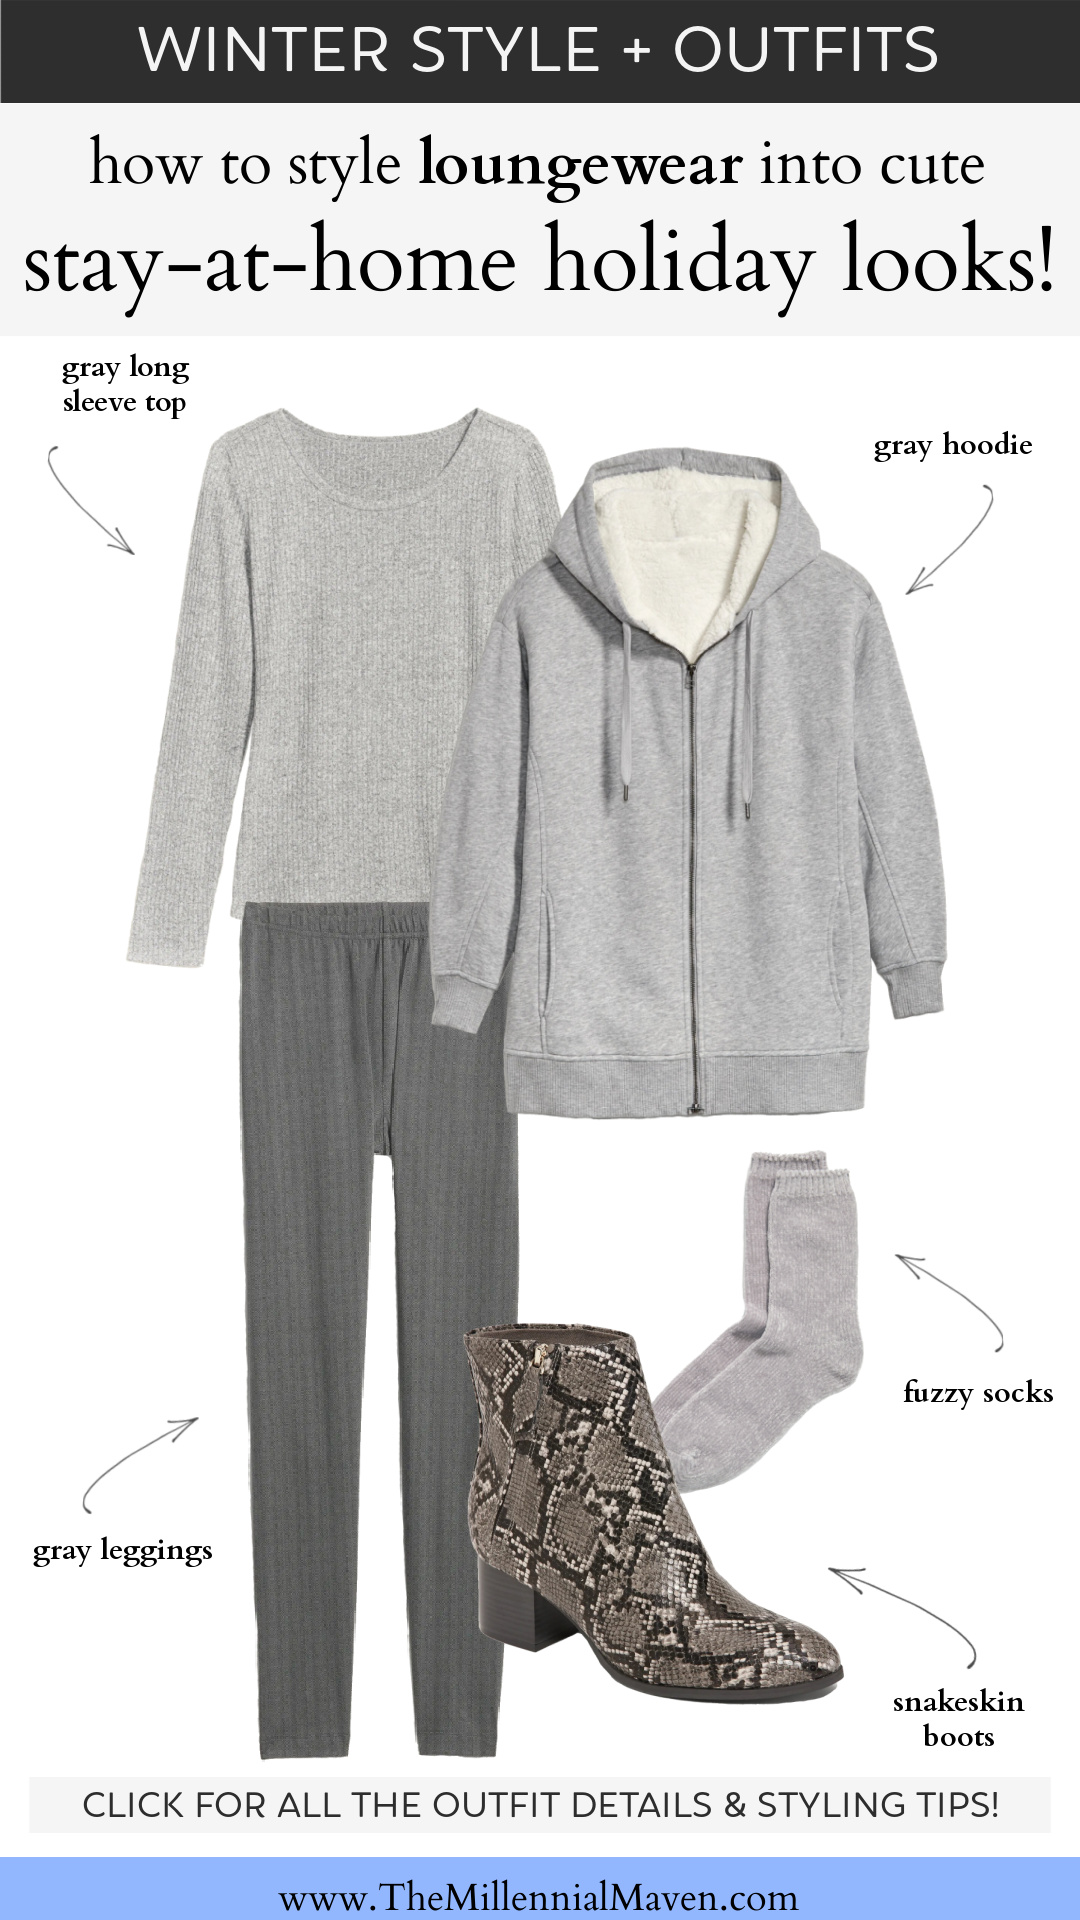 How To Style Loungewear For Holidays At Home